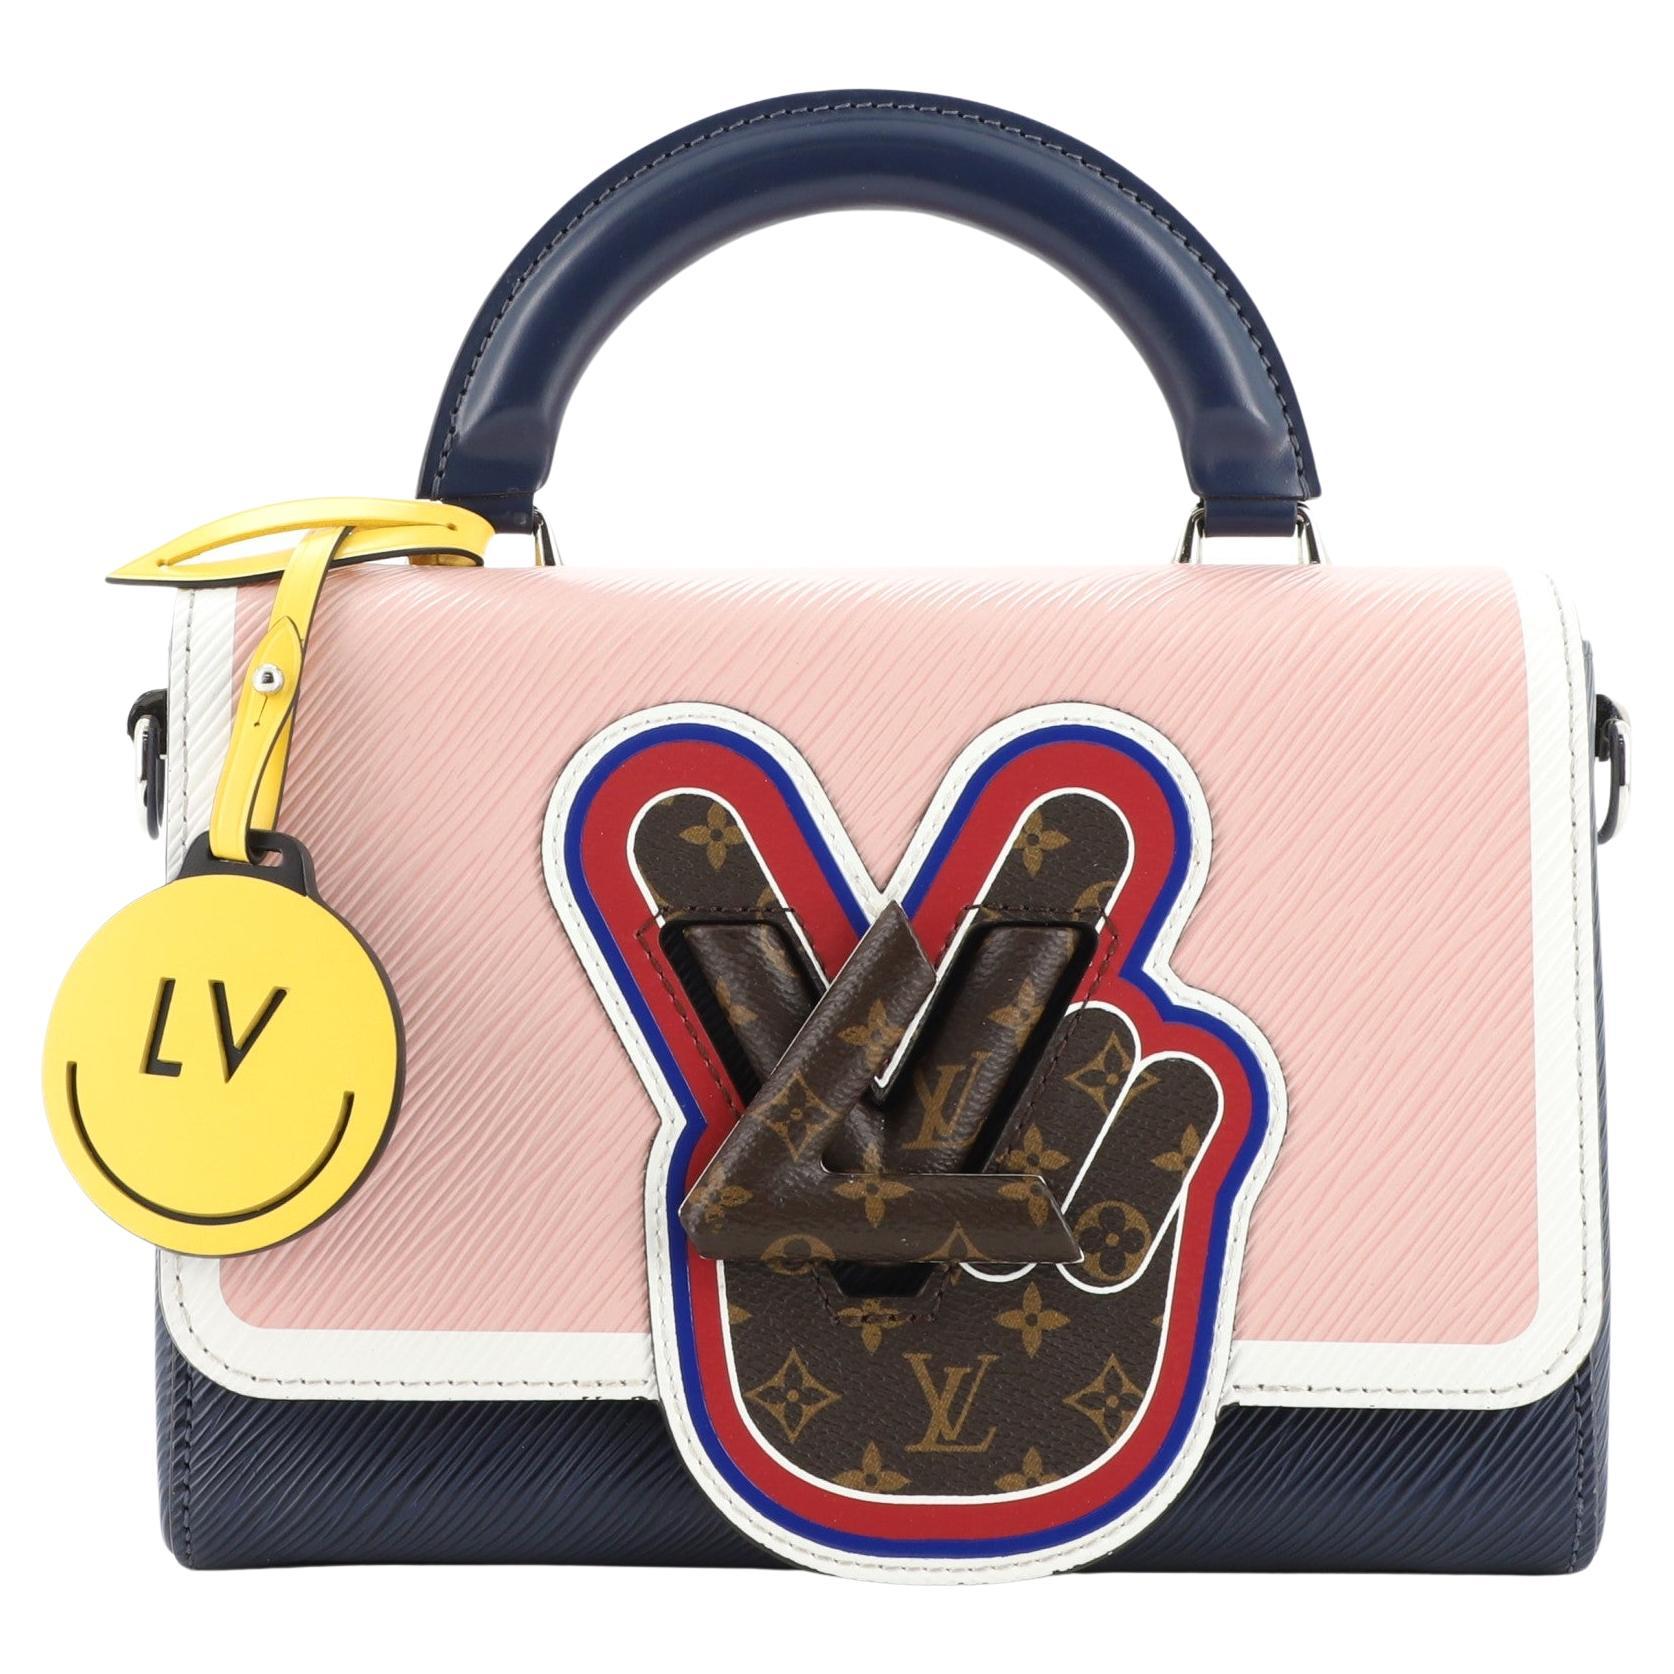 Compact twist mini Louis Vuitton in bright pink and a matching